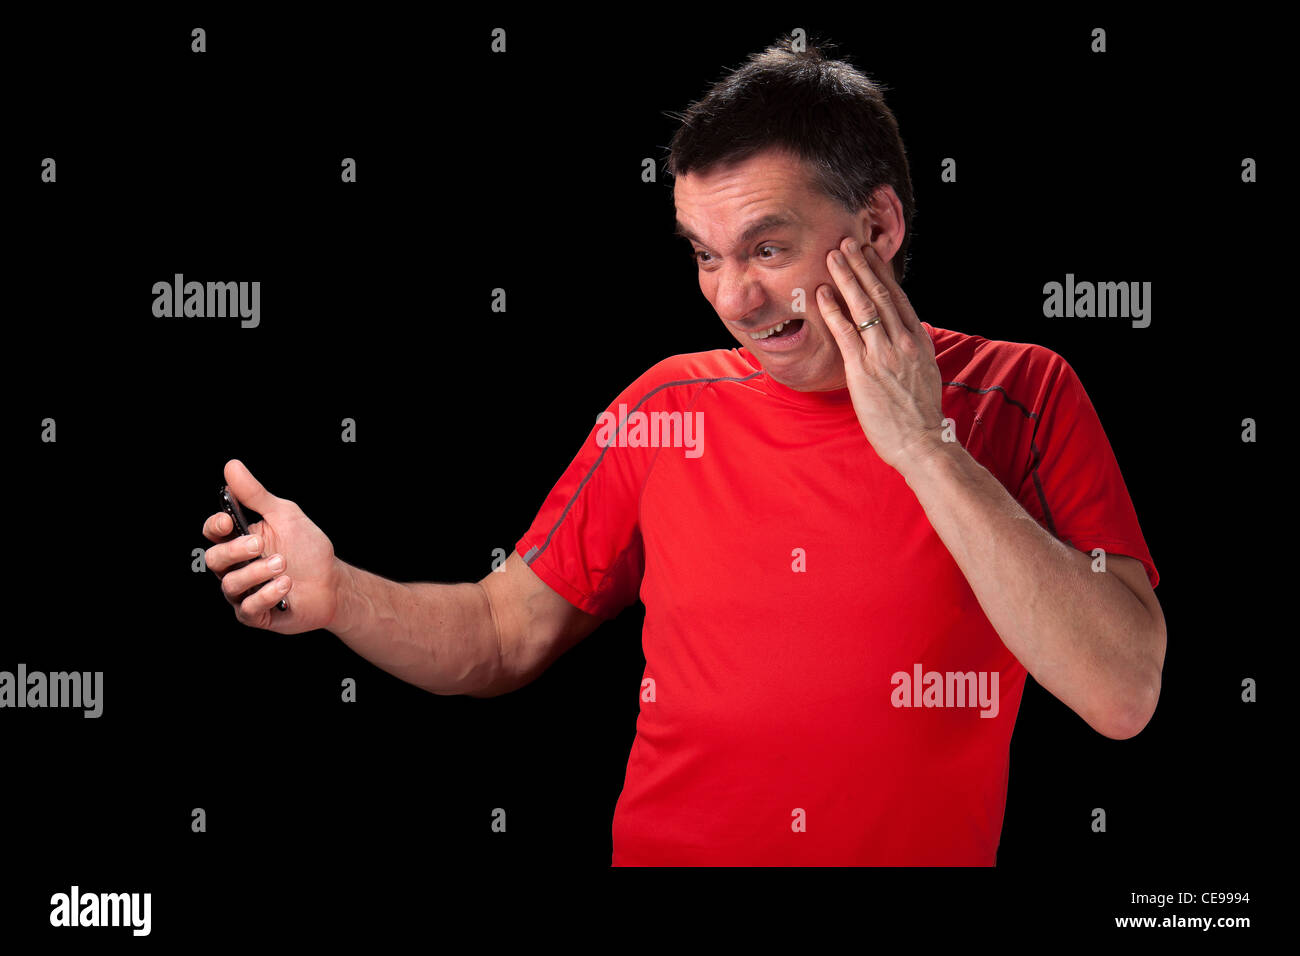 Middle Aged Man with horrified expression looking at phone in shock black background Stock Photo